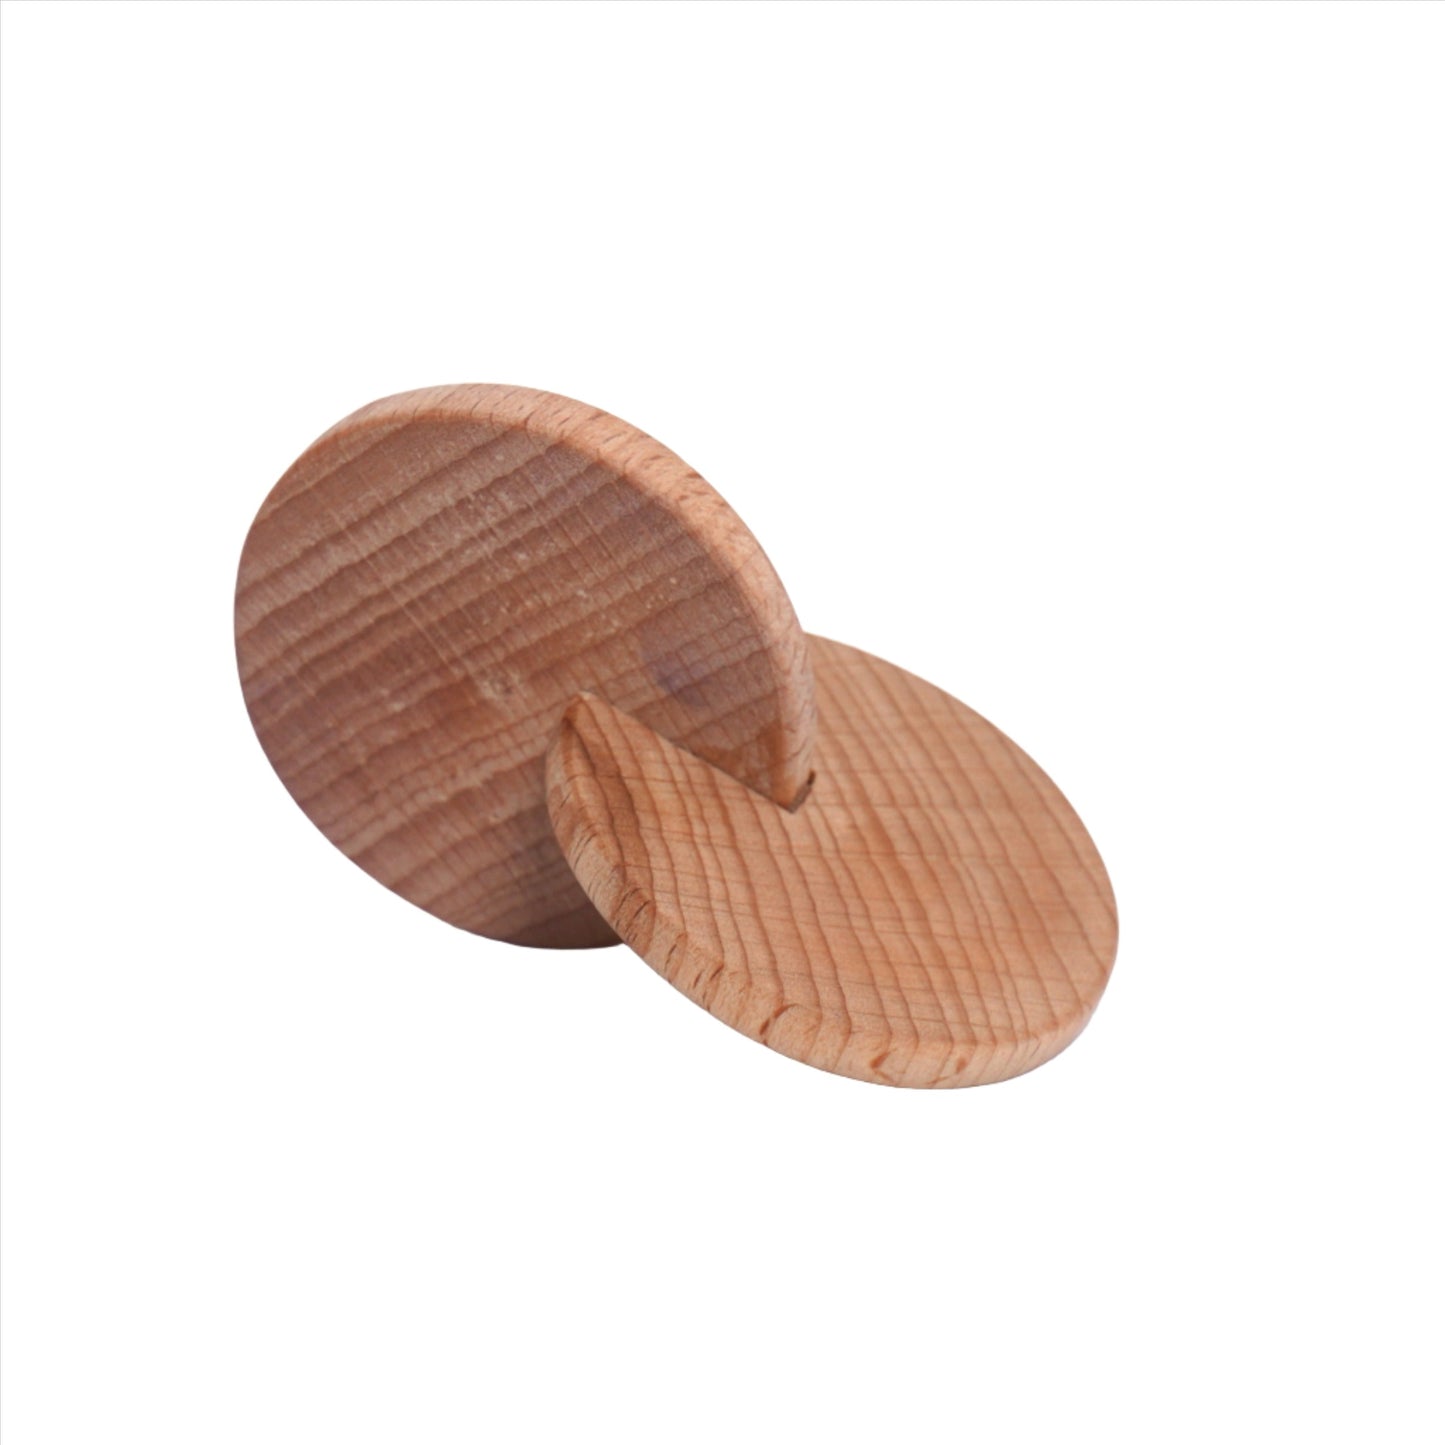 Two interlocking wooden discs stacked on top of each other on a white background. This simple wooden toy helps develop motor skills, hand-eye coordination, and problem-solving abilities in young children. 